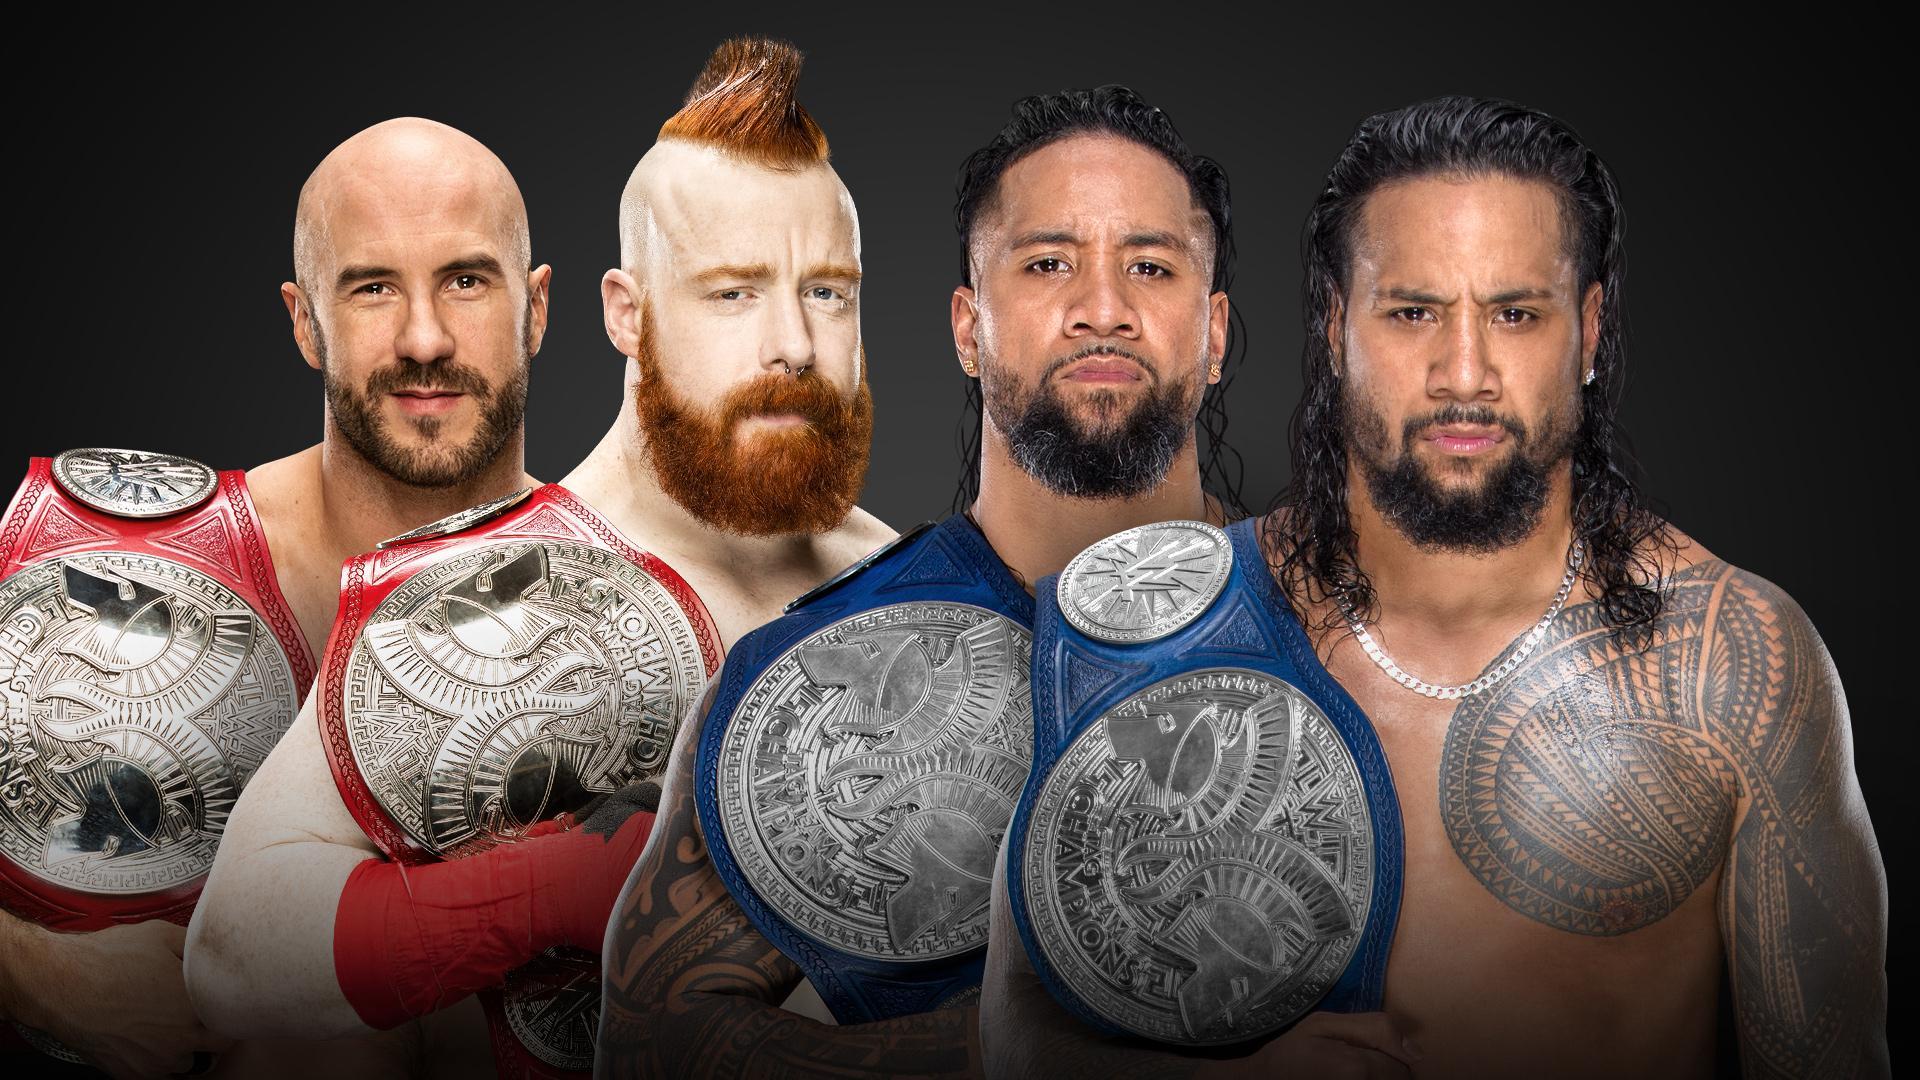 Updated card for WWE Survivor Series, all members of Team RAW now